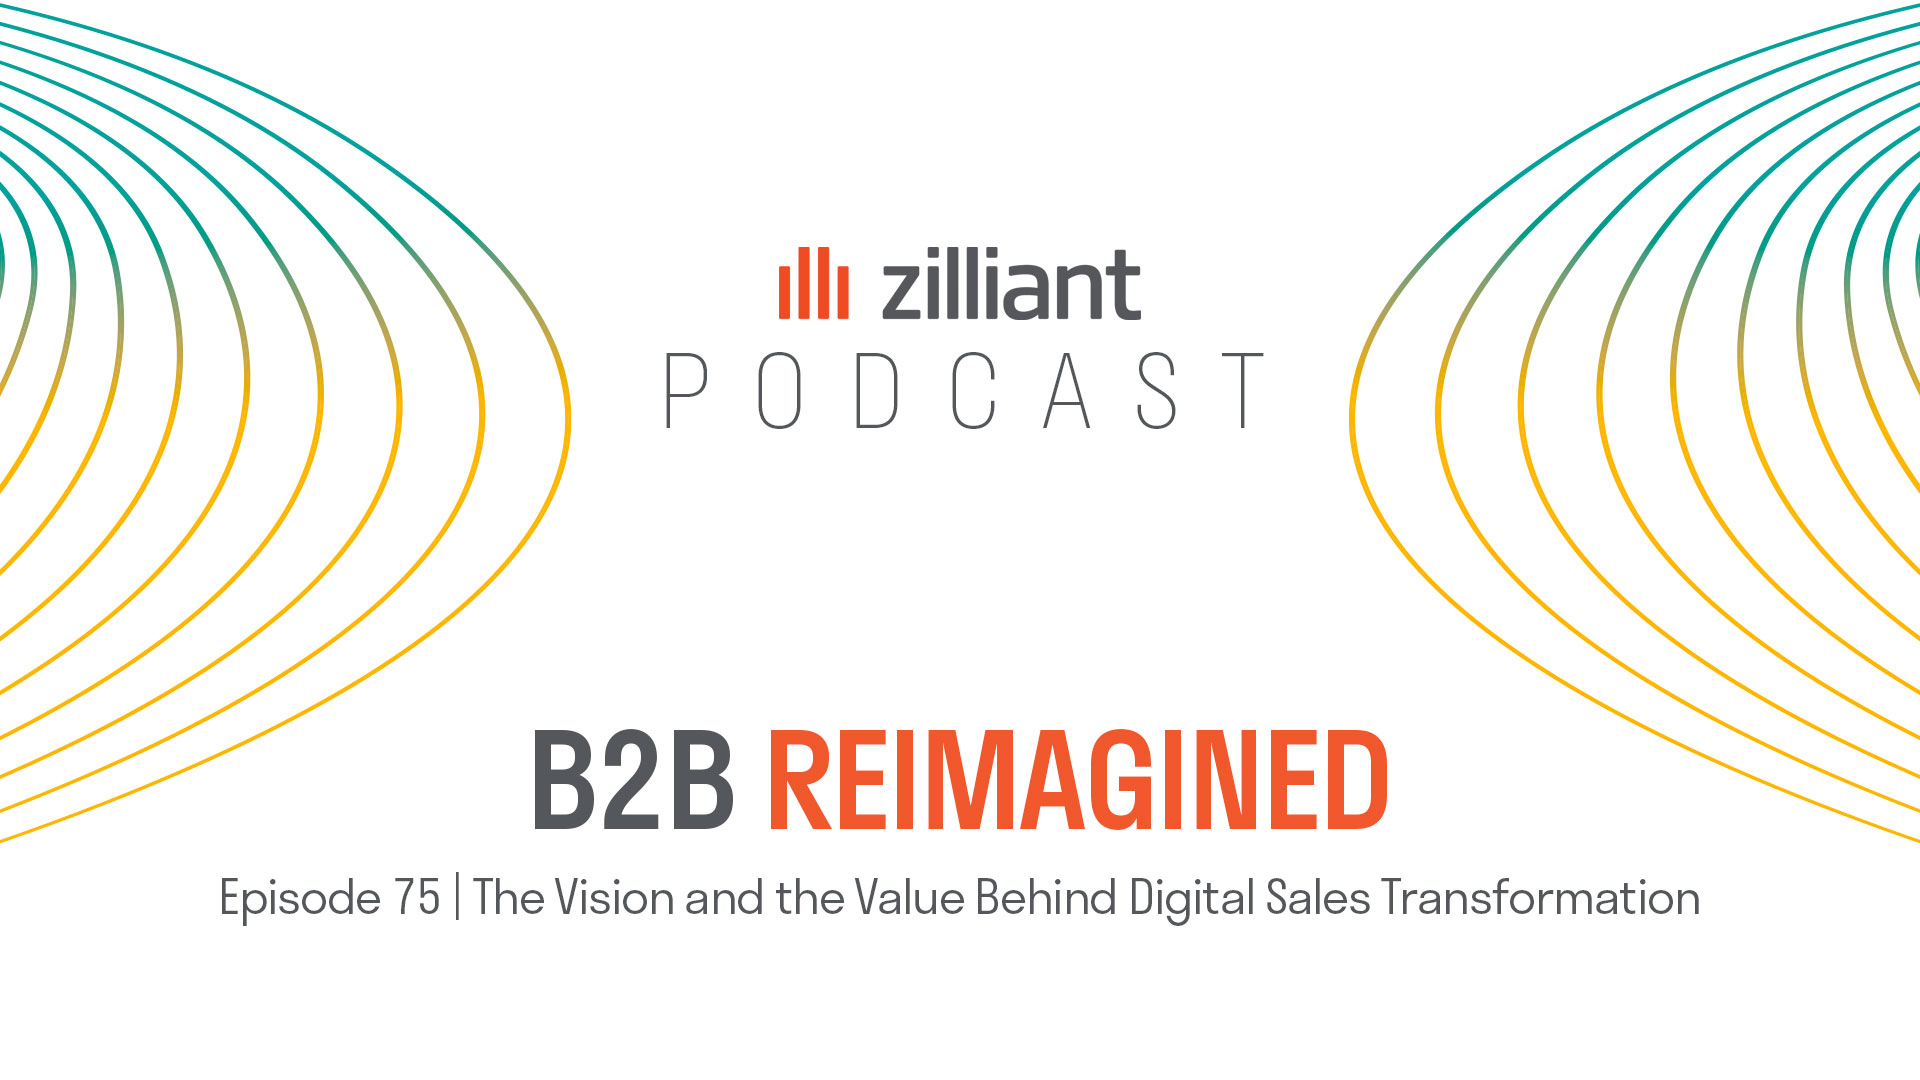 CEO Summit: The Vision and Value Behind Digital Sales Transformation